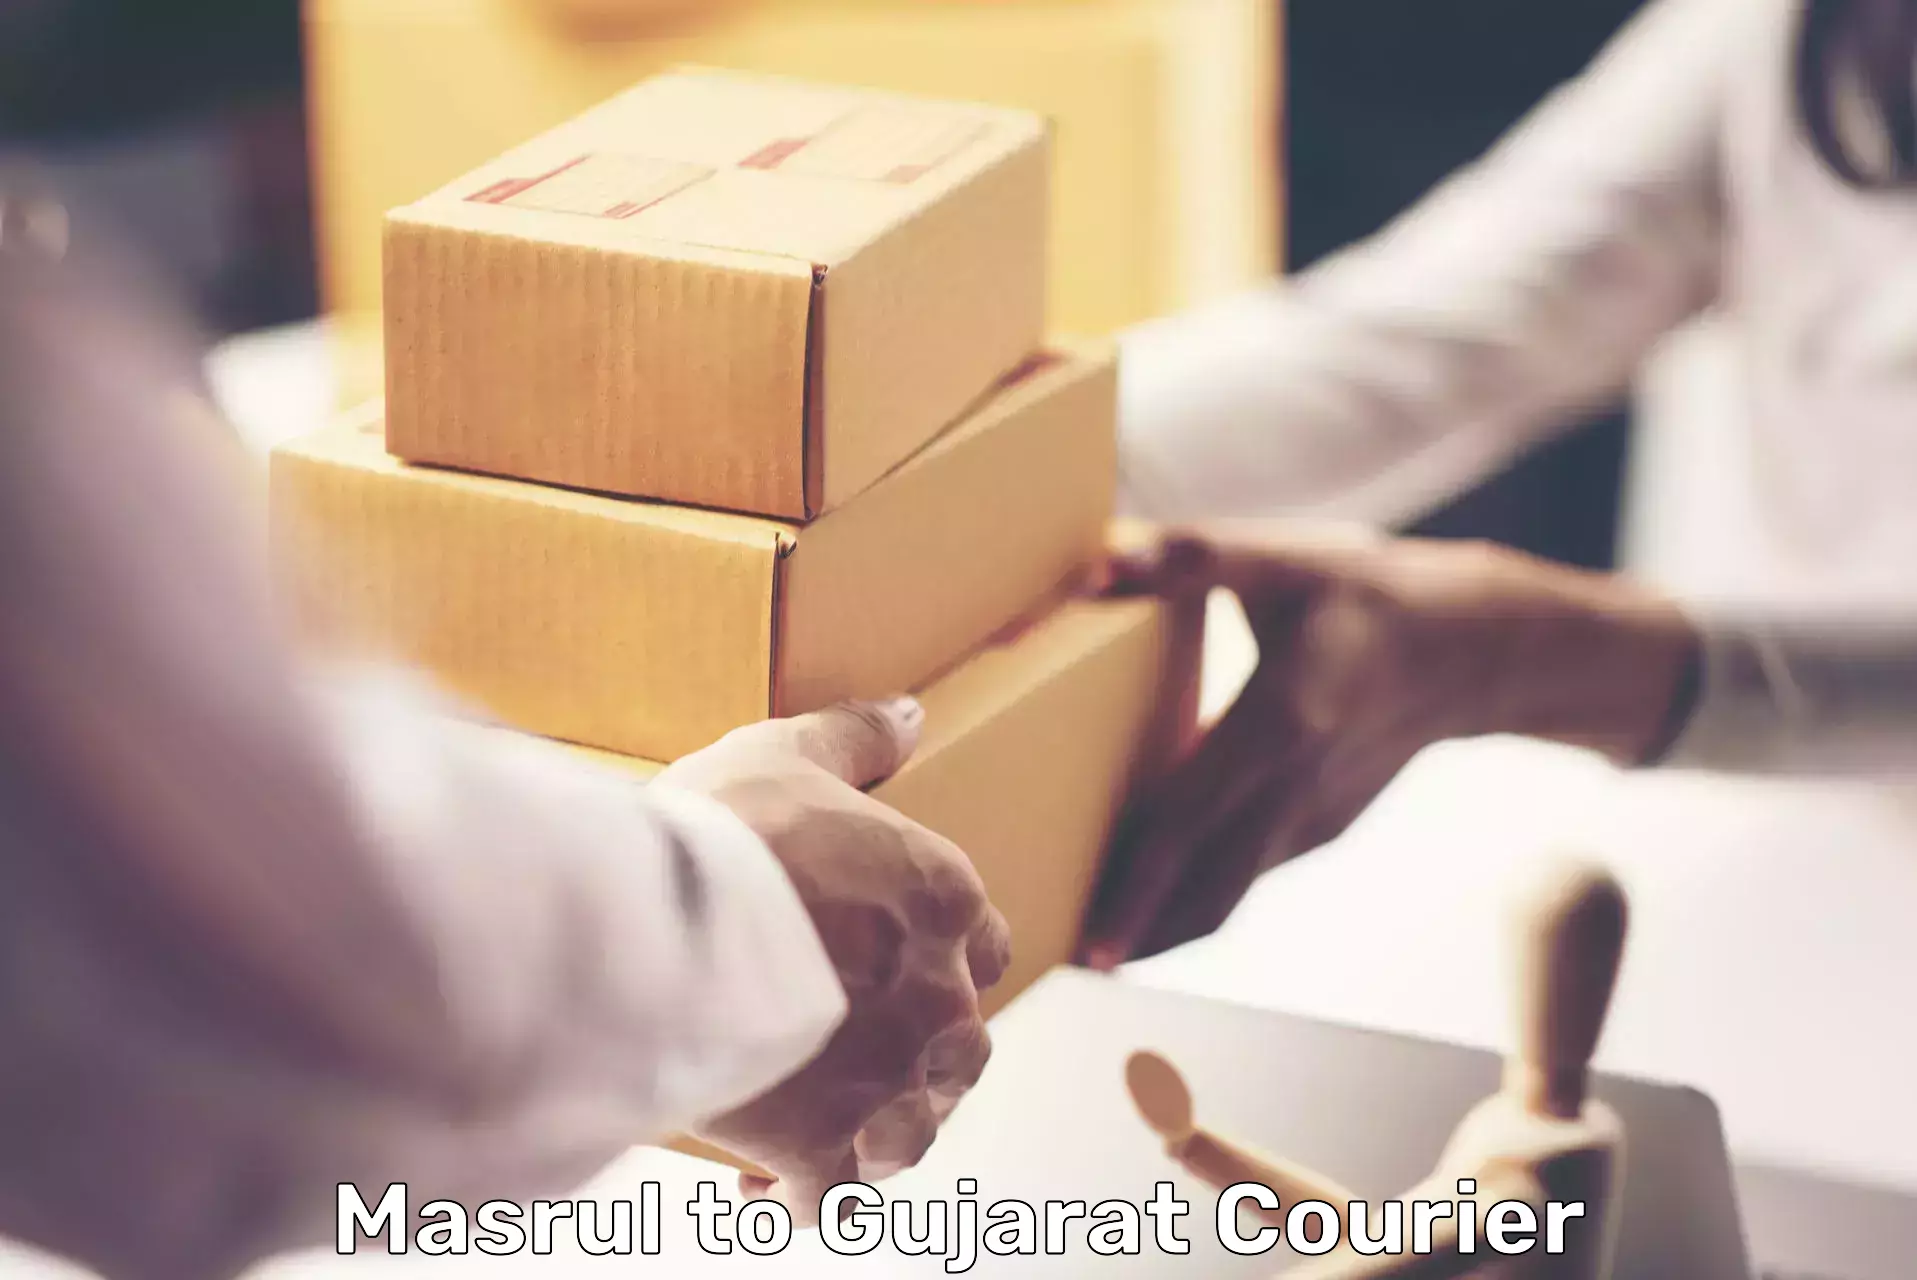 Courier insurance Masrul to Anand Agricultural University